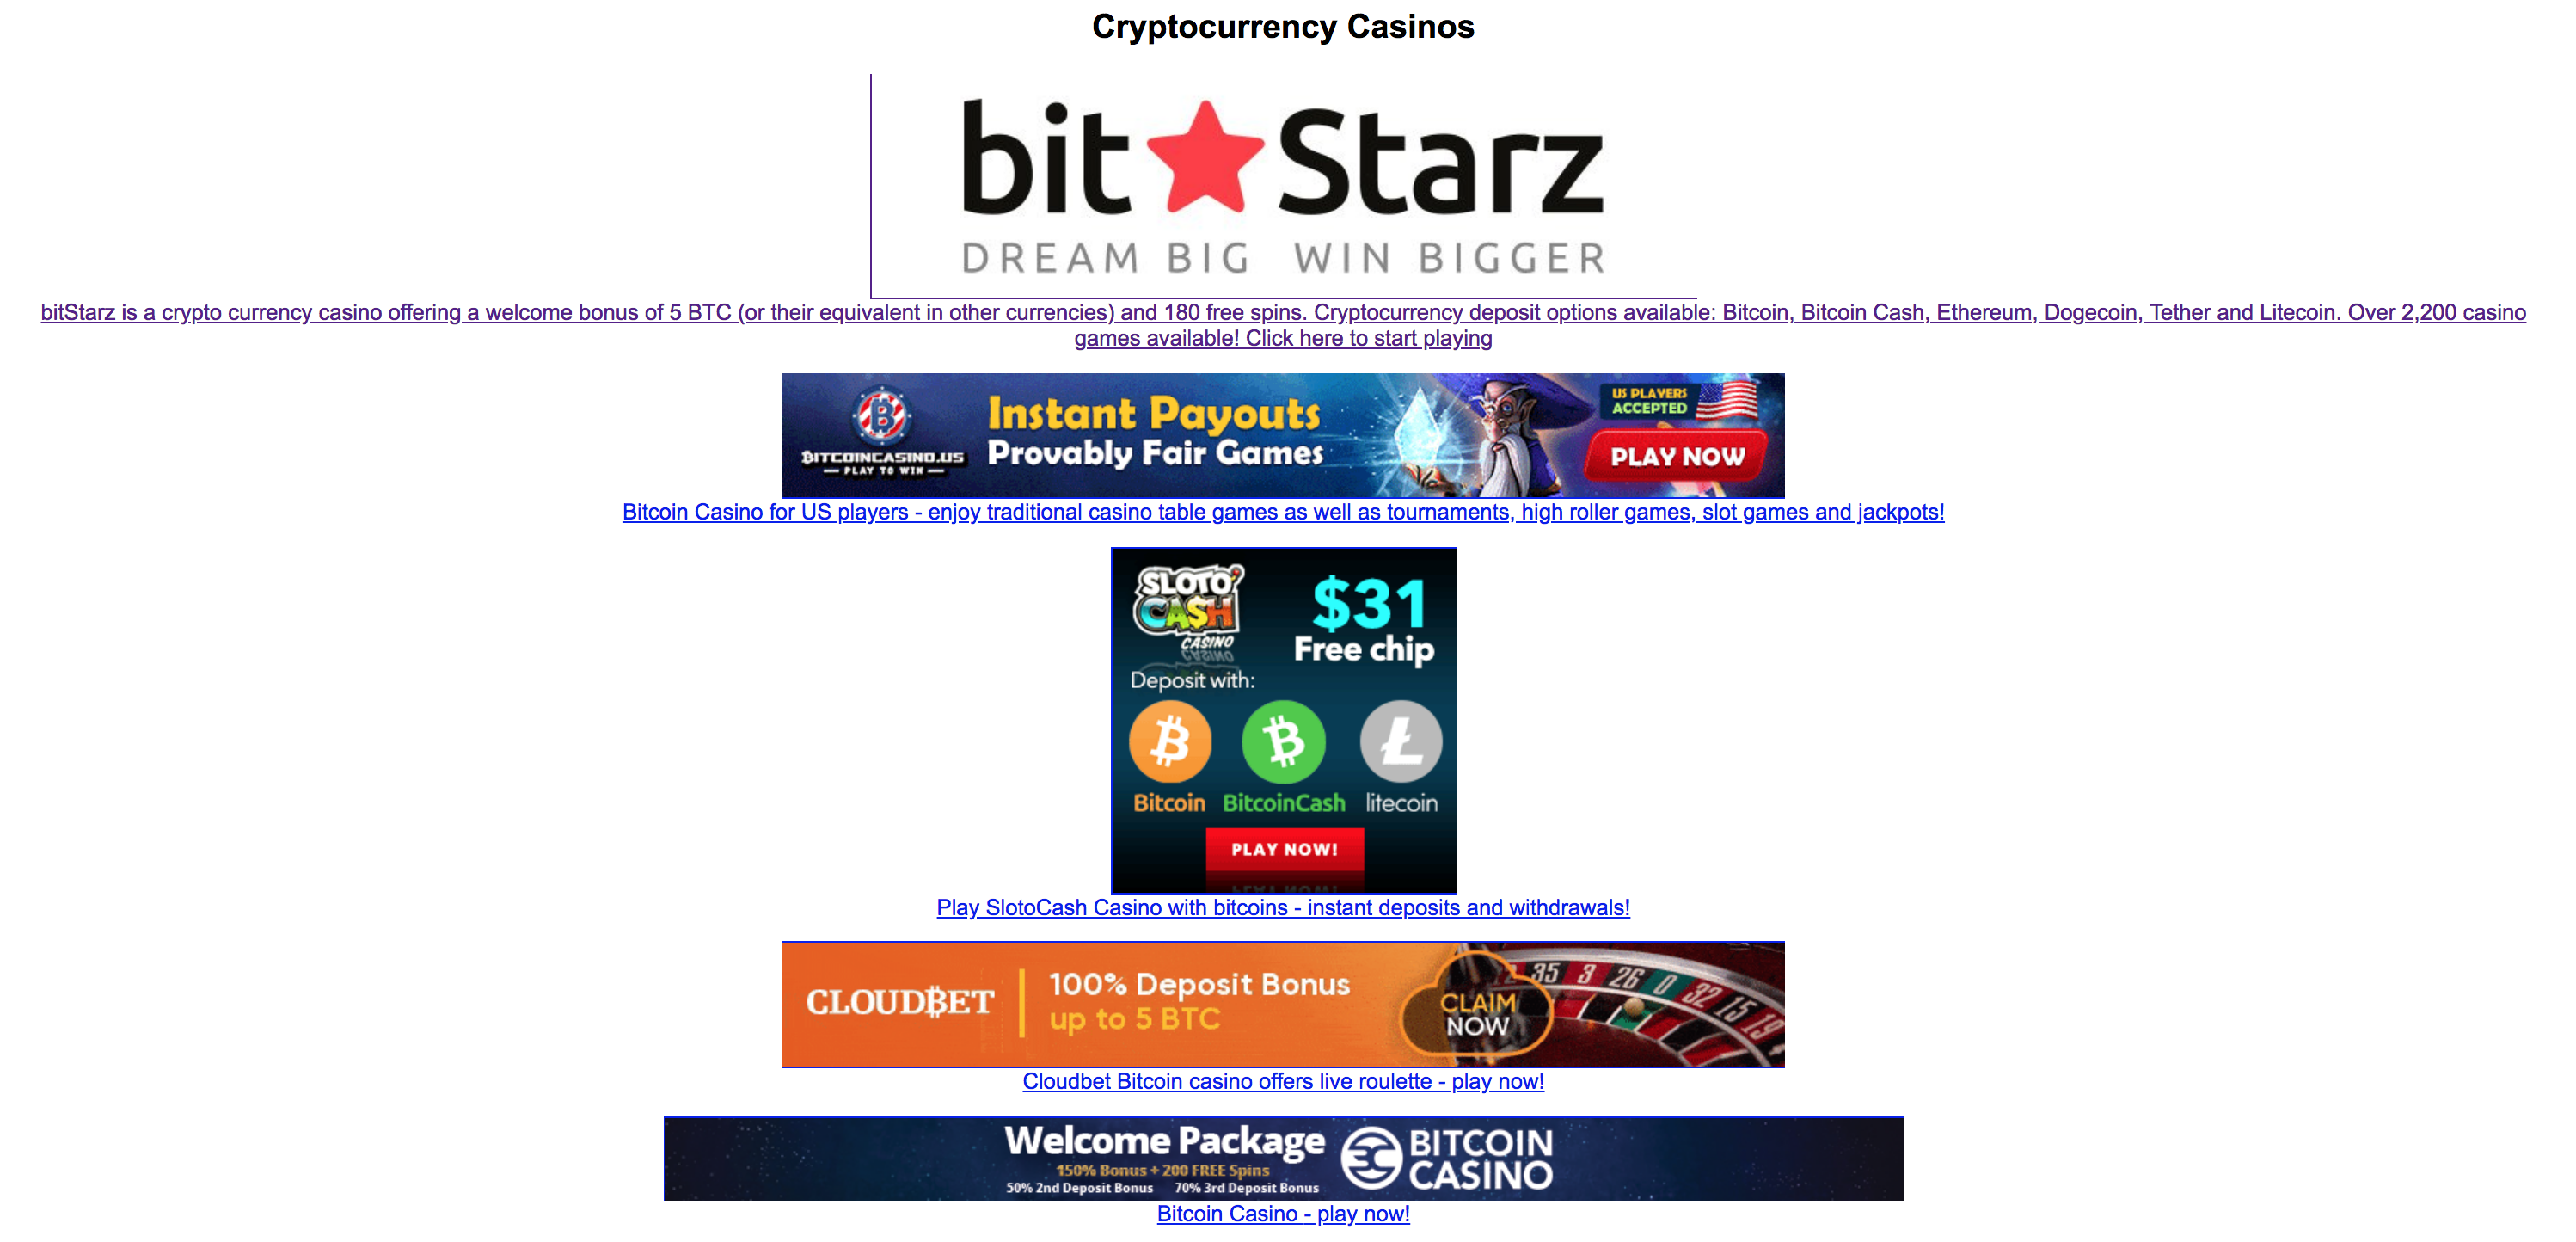 Best online casino payout usa